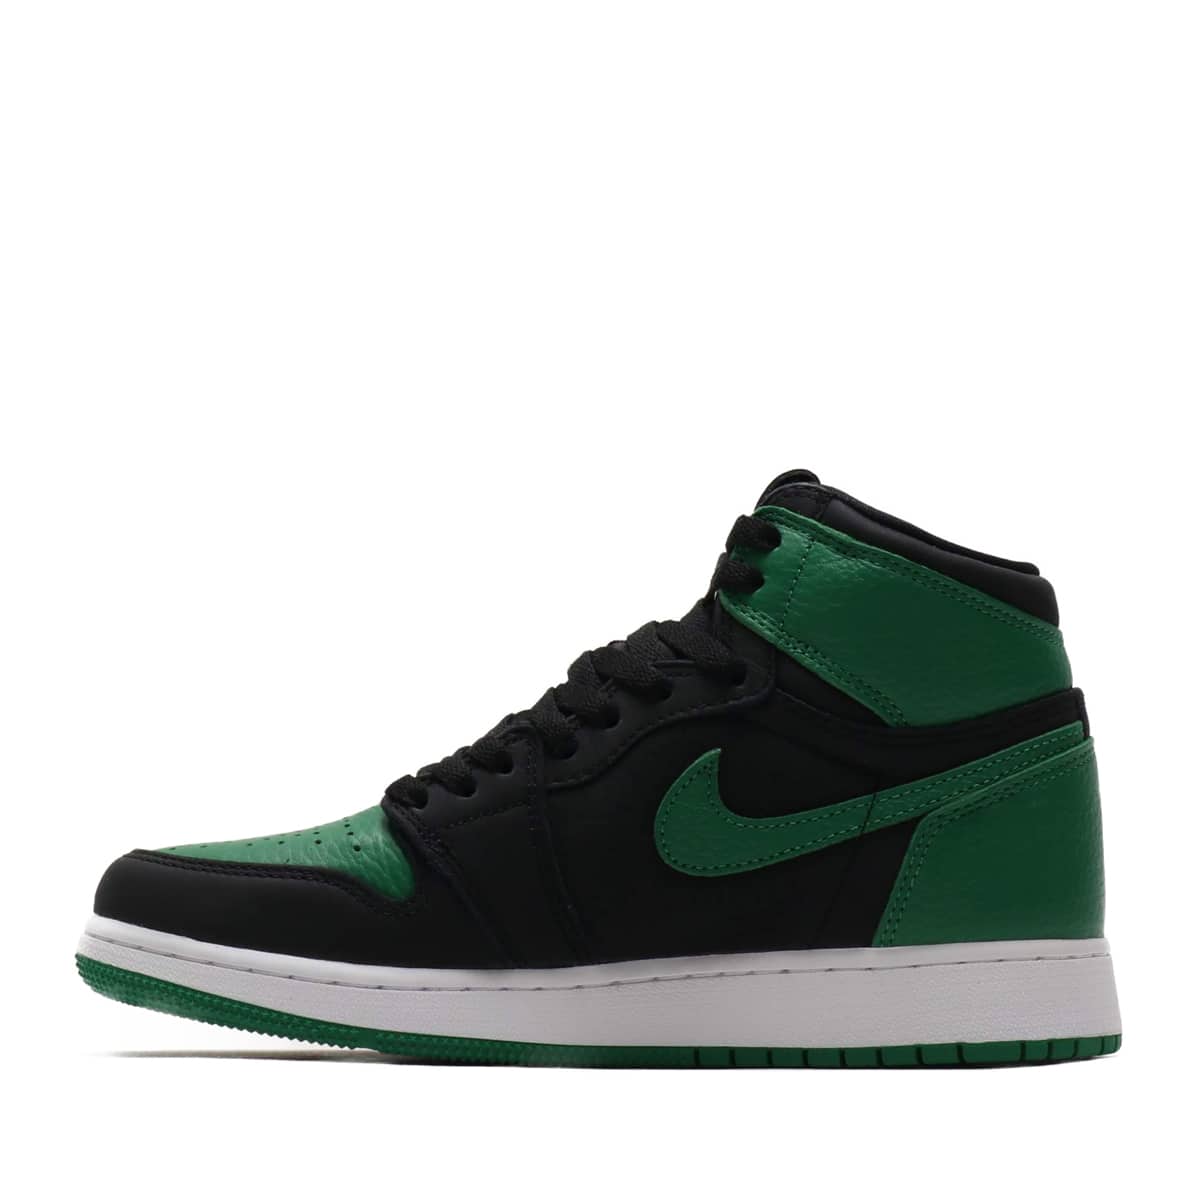 pine green 1s size 5.5